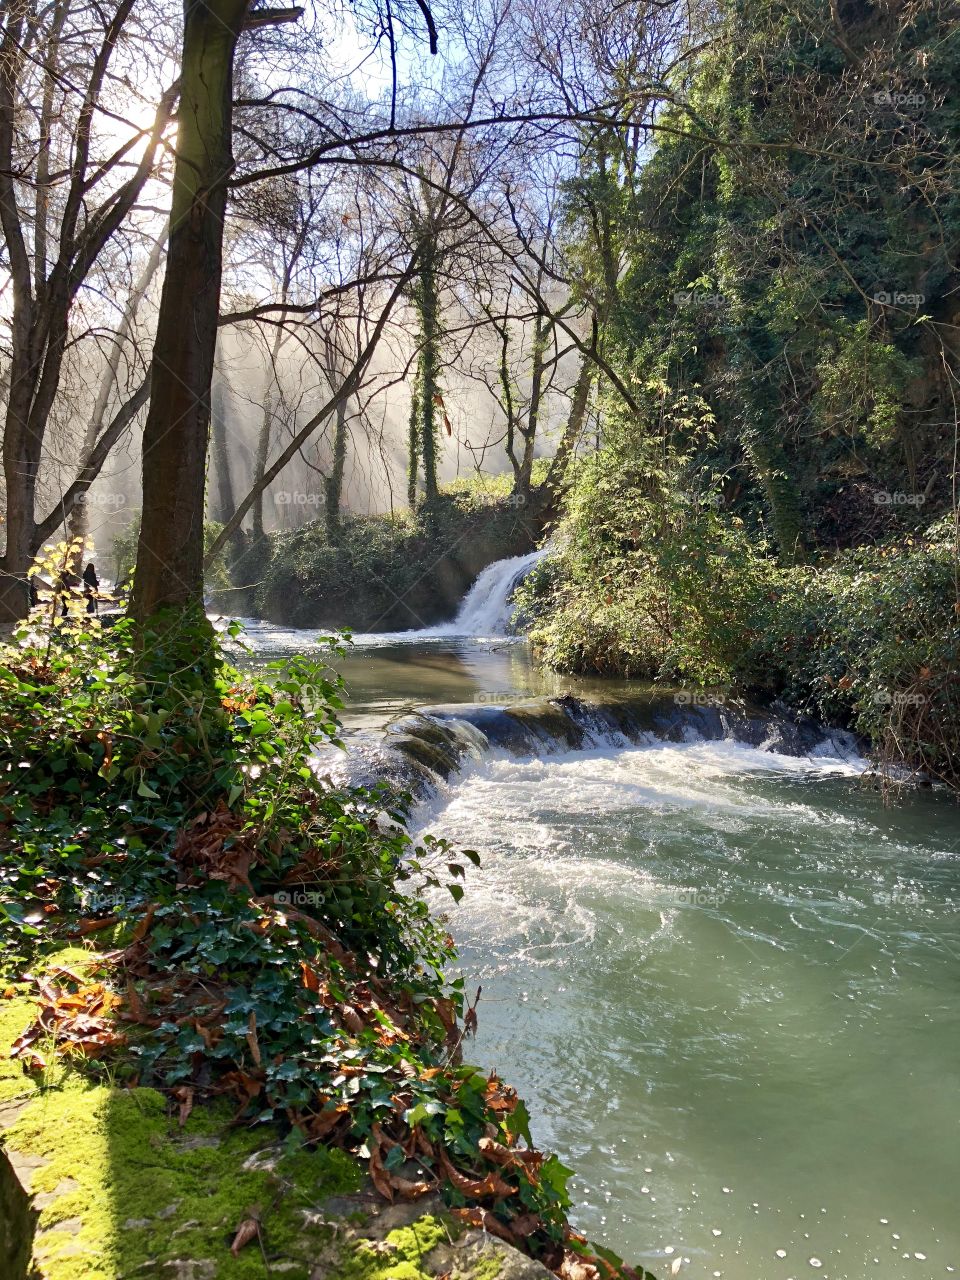 A crisp, beautiful spring morning at the base of a lush waterfall where the water rushing over centuries year old formations is perfectly captured. The morning fog is just lifting out of the trees to reveal the welcome sunshine. 